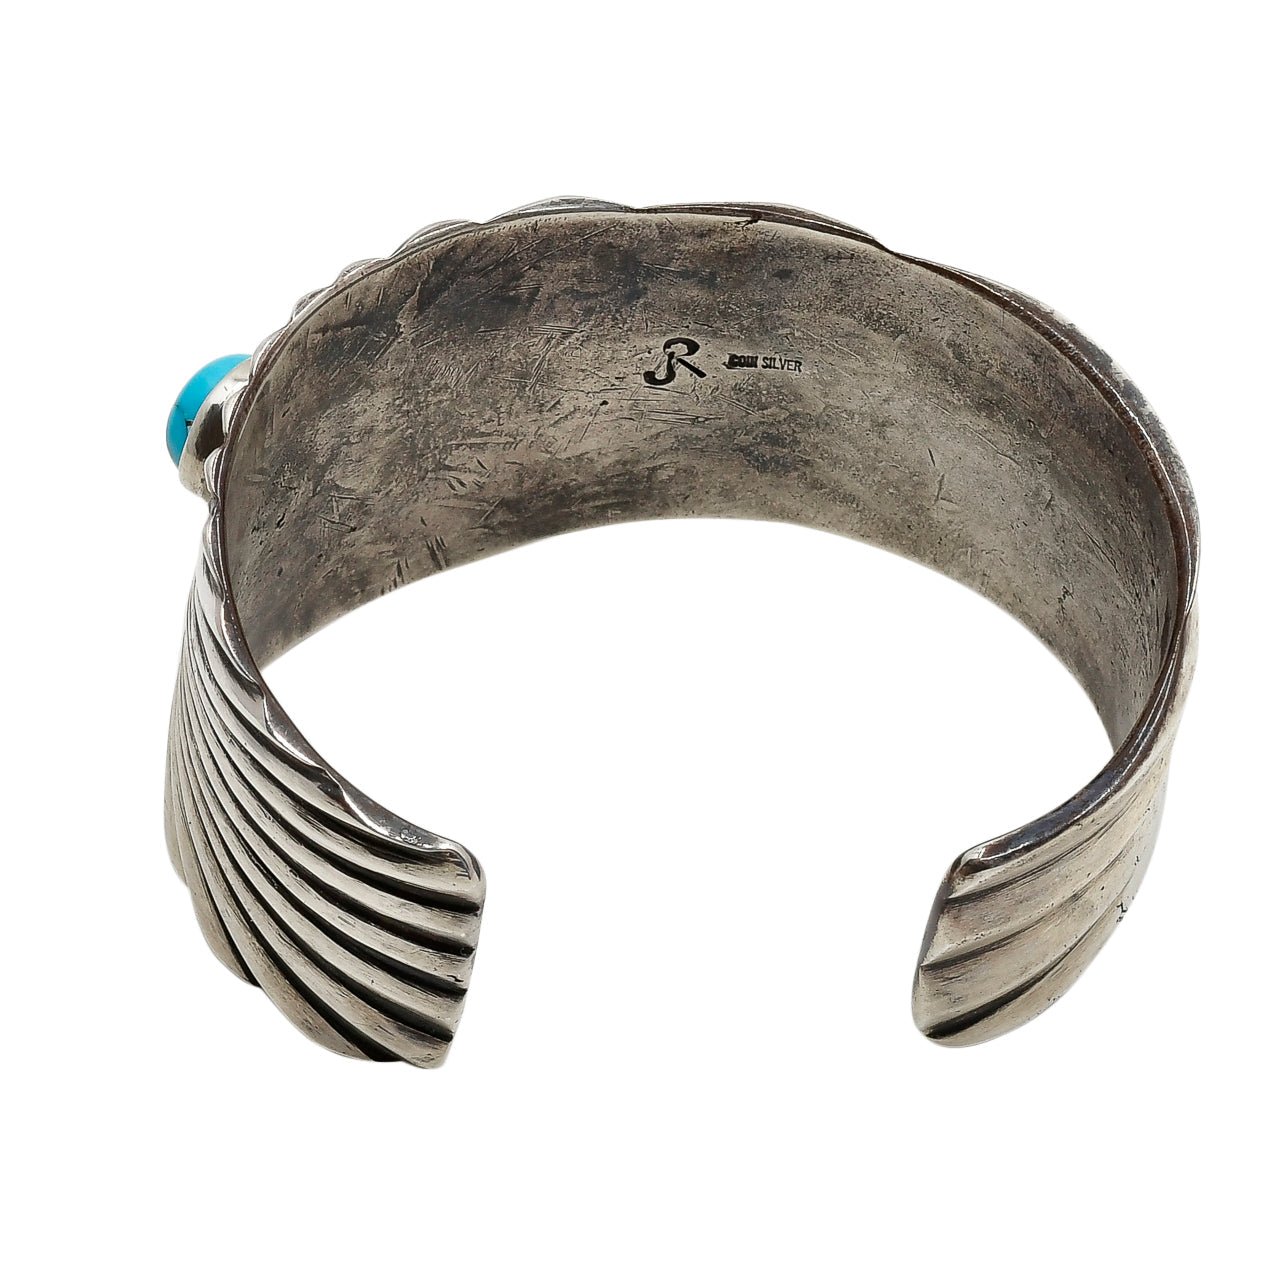 Wide Jesse Robbins Cuff of Ingot Silver and Turquoise